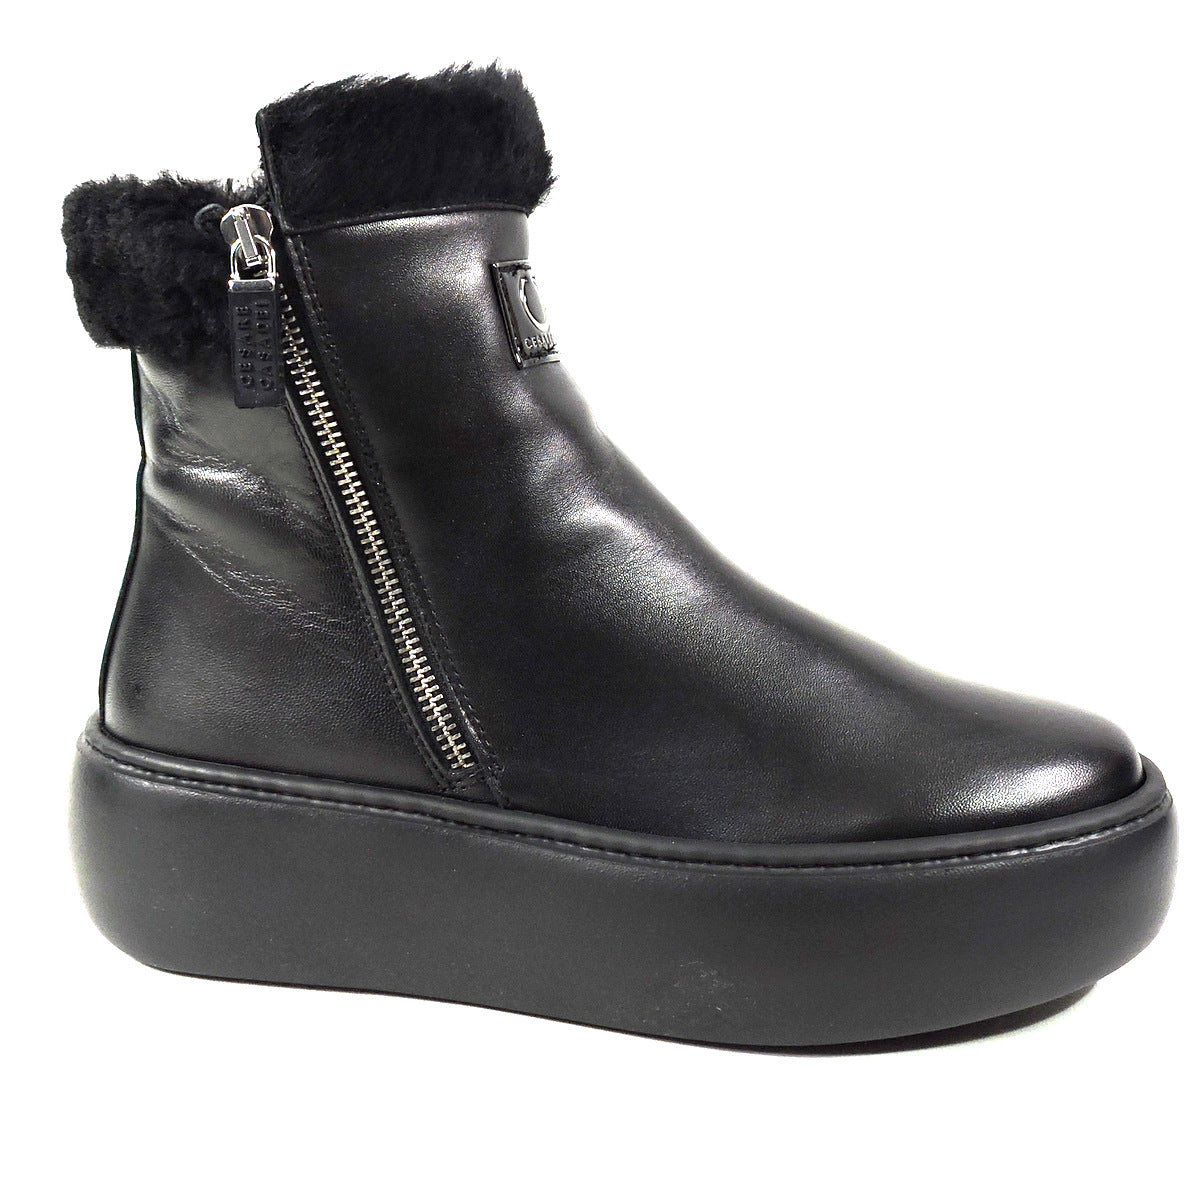 CASADEI 🇮🇹 WOMEN'S BLACK SOFT LEATHER WINTER ANKLE BOOTIE